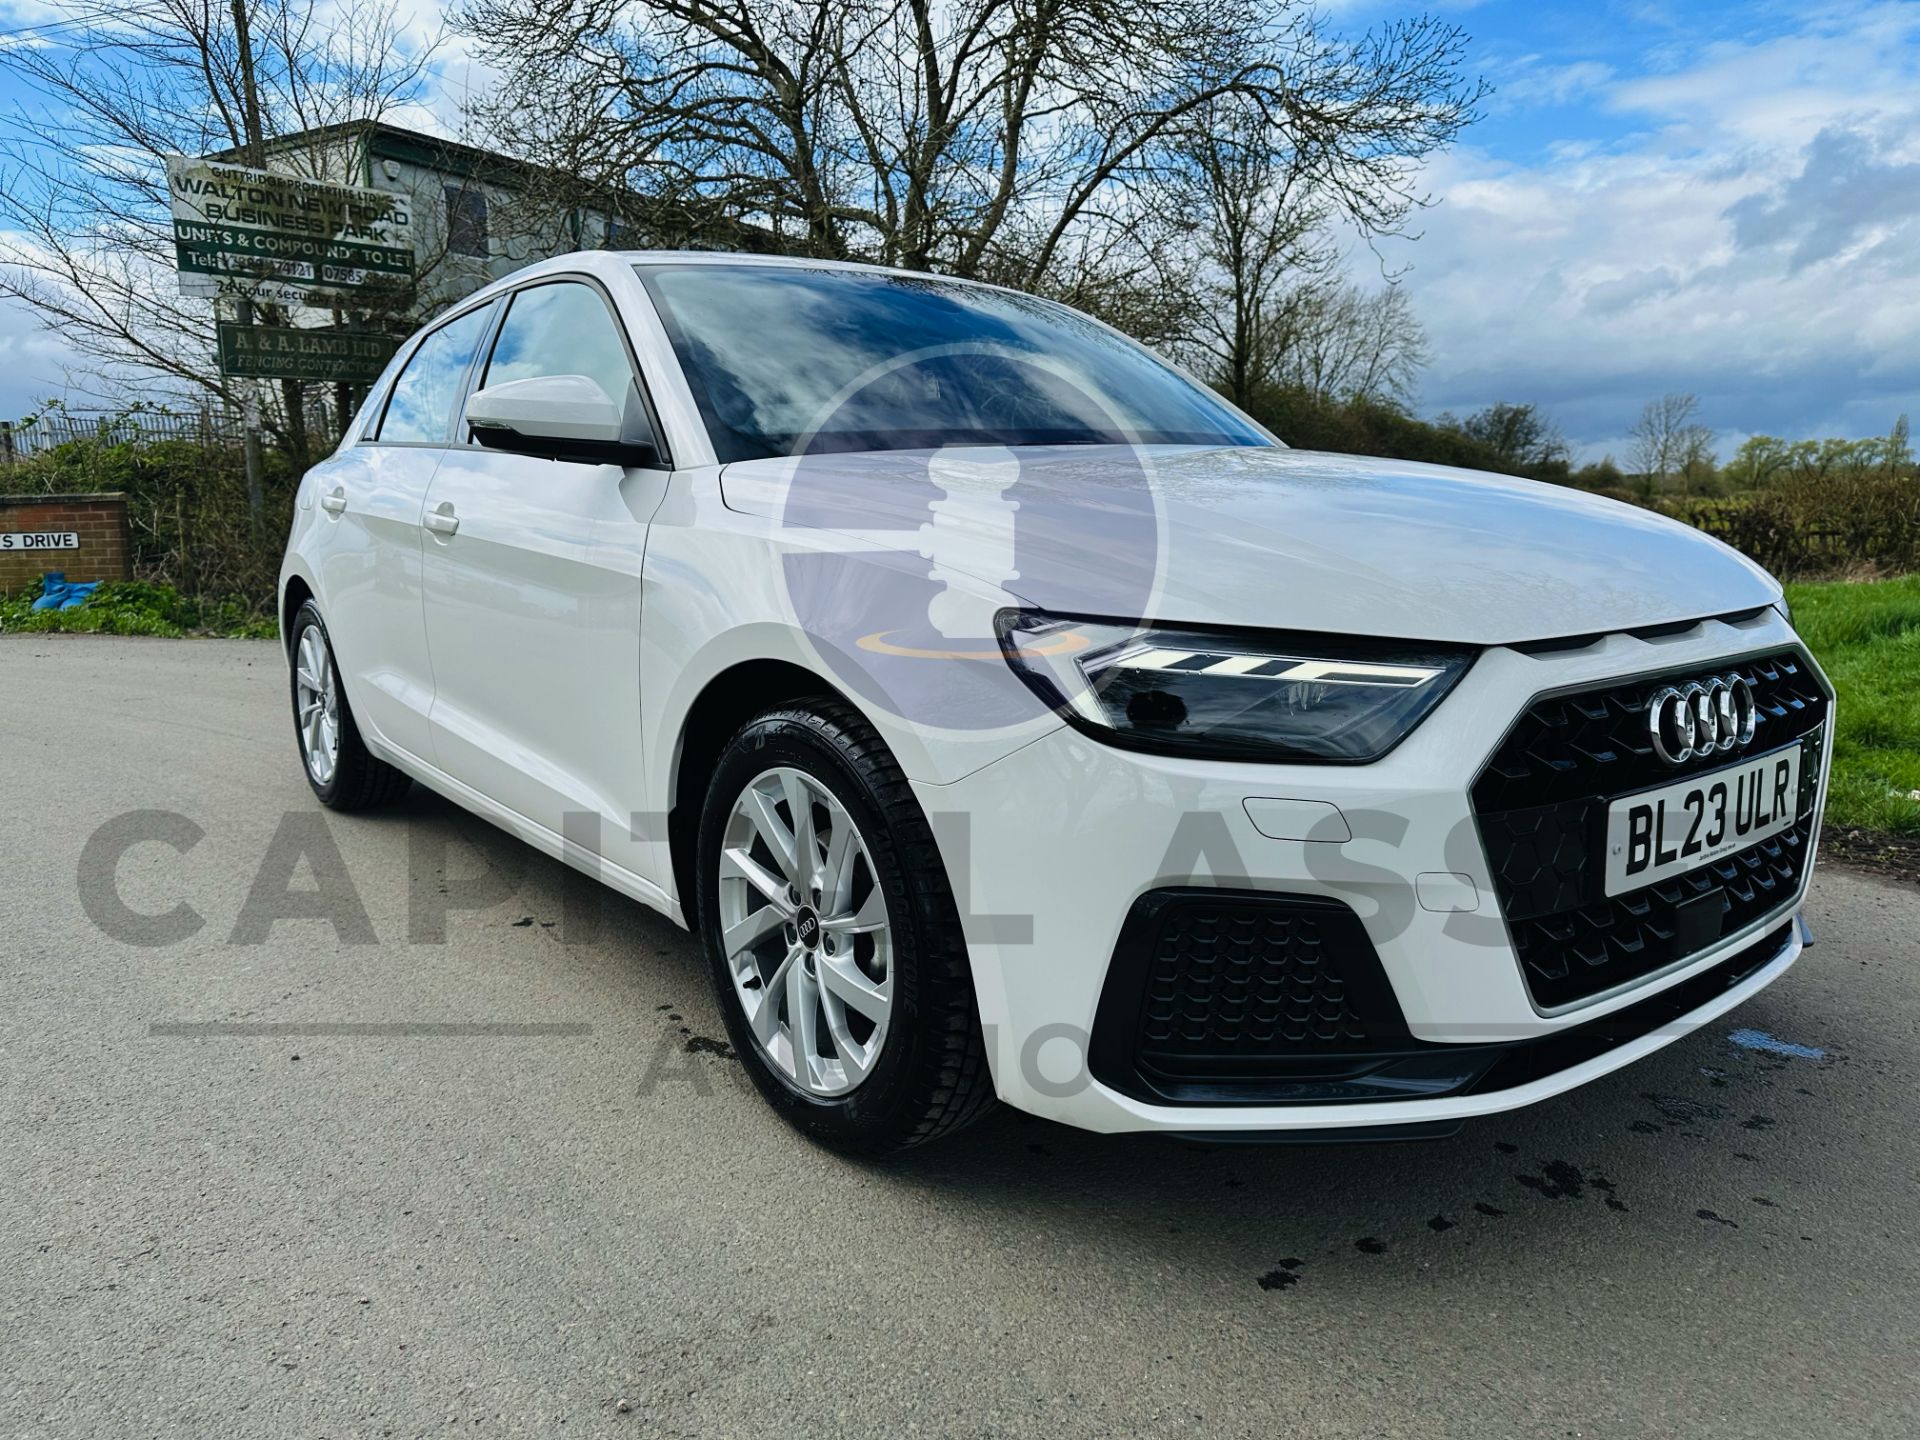 AUDI A1 "SPORT LINE" 1.0 TFSI AUTO - 23 REG - ONLY 5K MILES - 1 OWNER - PARKING PACK - GREAT SPEC! - Image 2 of 46